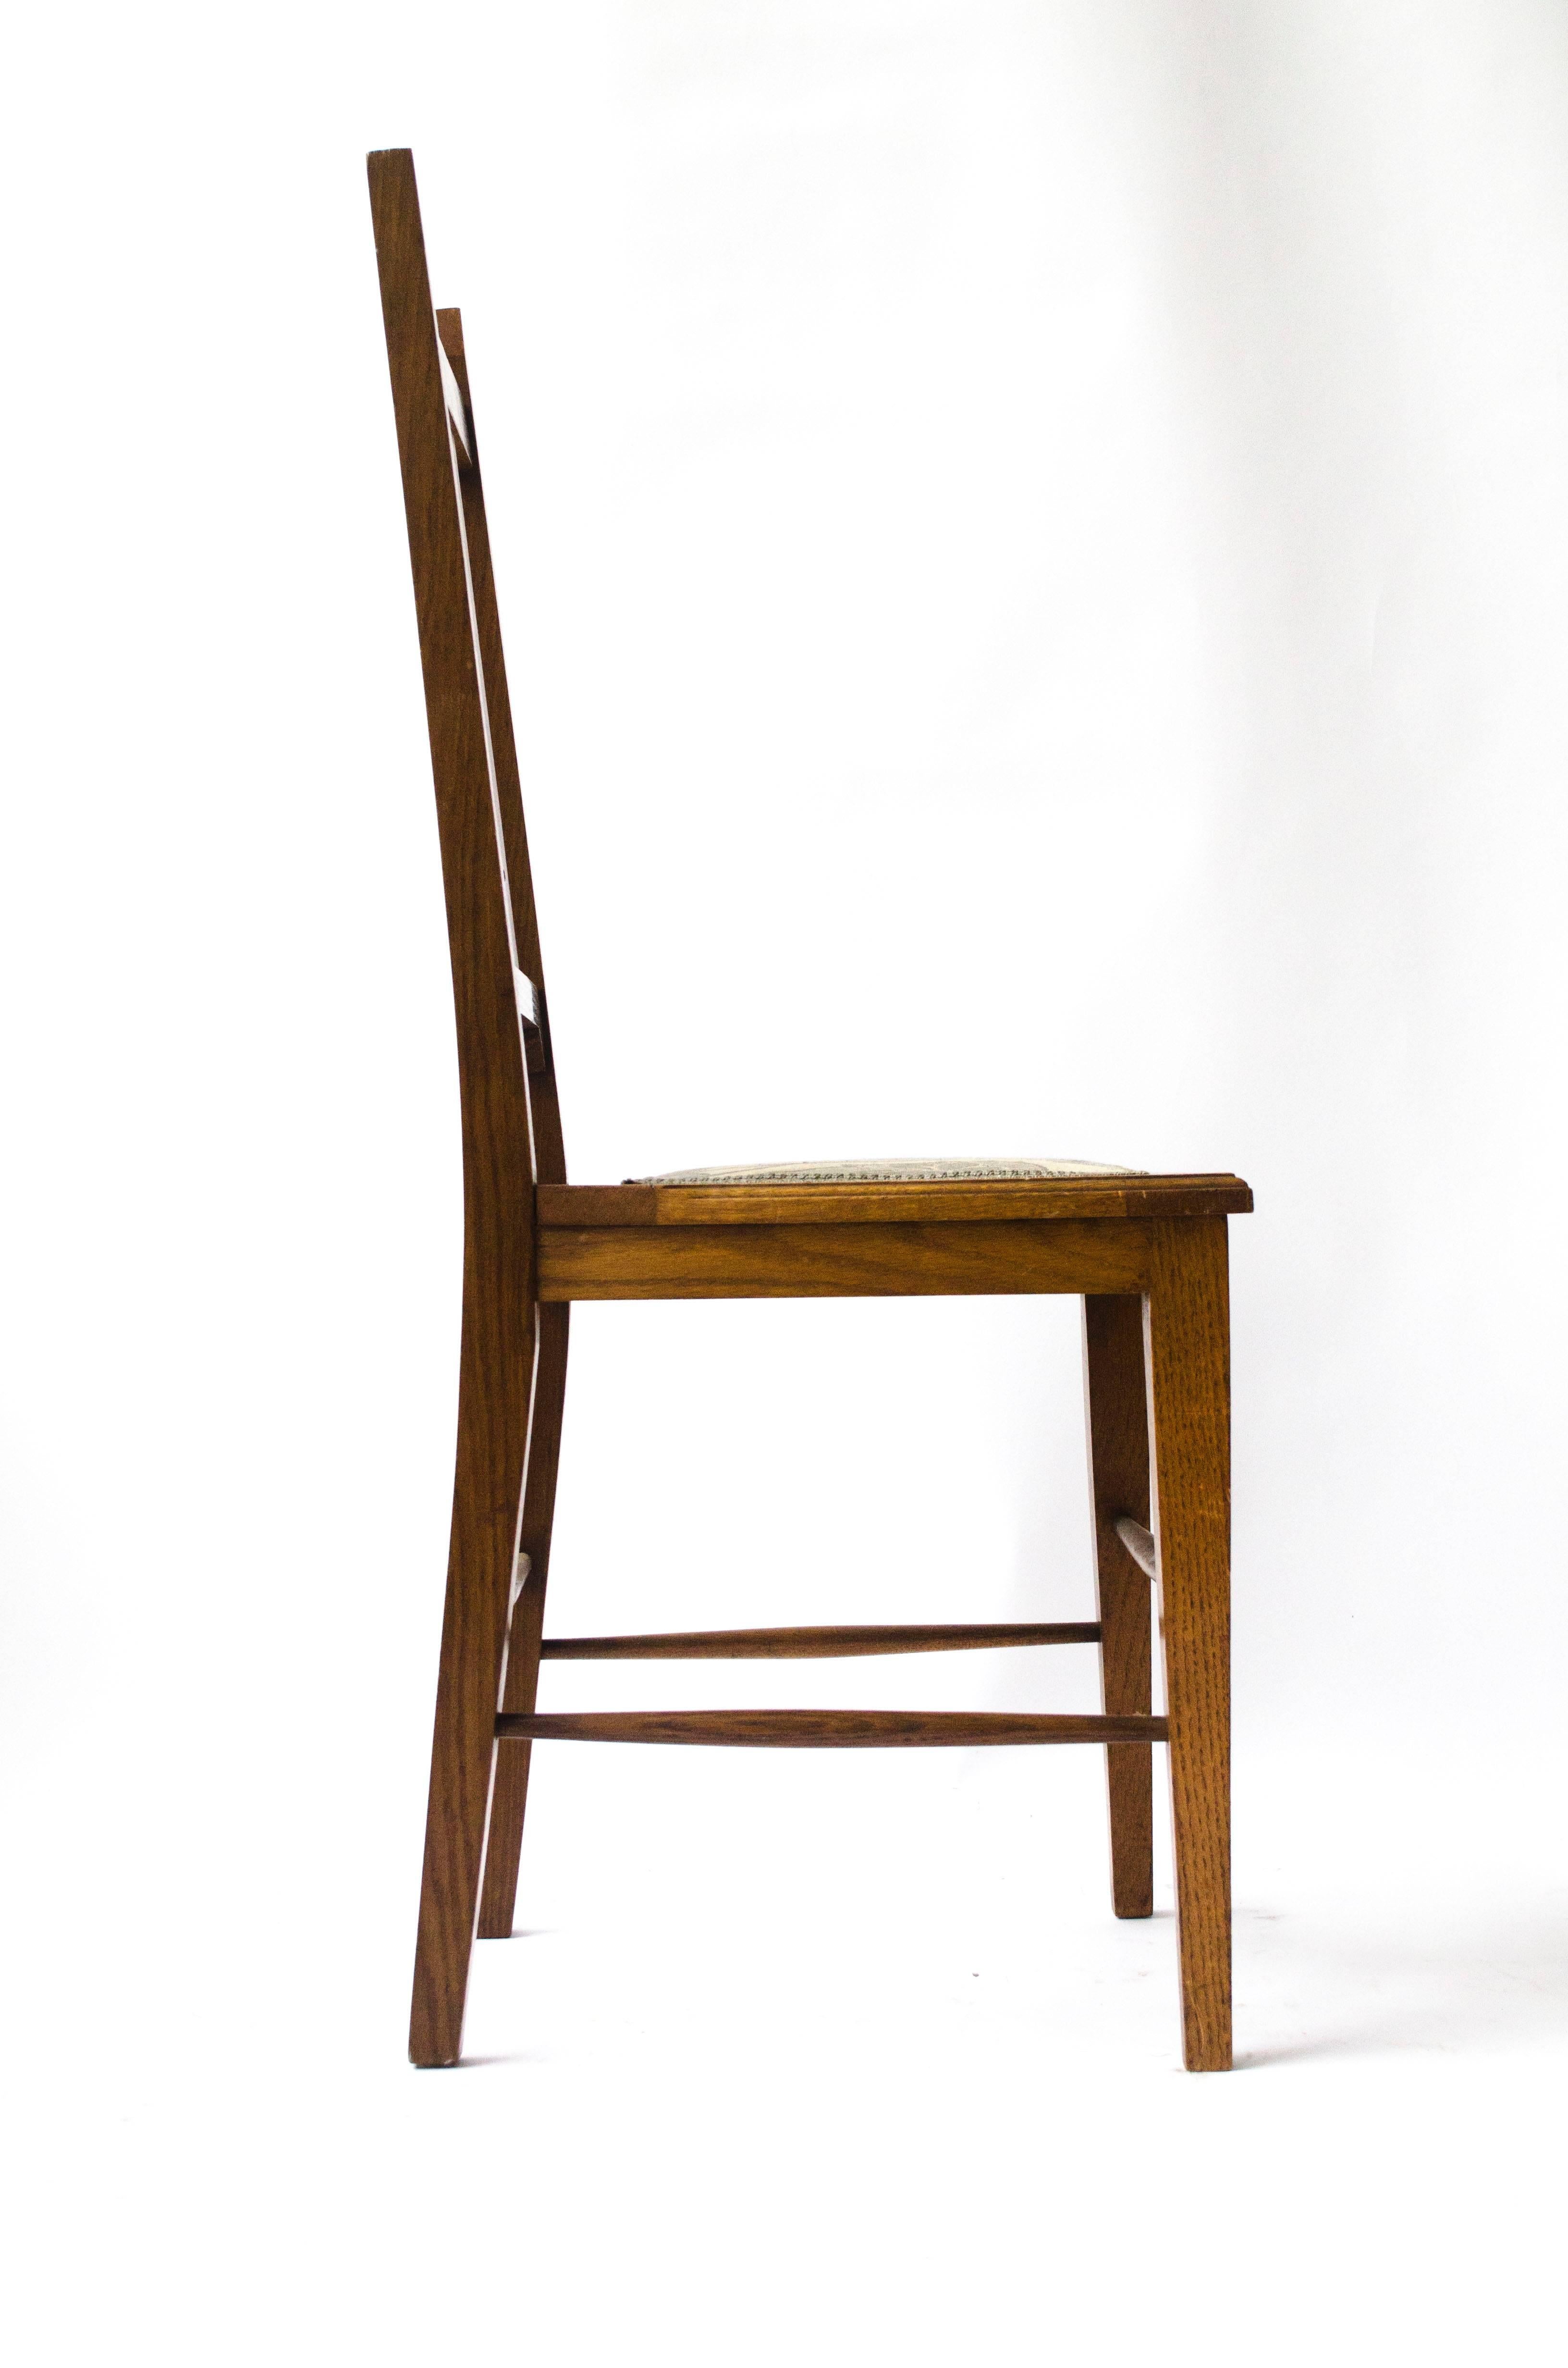 E A Taylor attri, made by Wylie and Lochhead.
An Arts and Crafts Scottish School oak chair attributed to with stylised cut-out to the back and a wonderful Arts and Crafts floral upholstery.